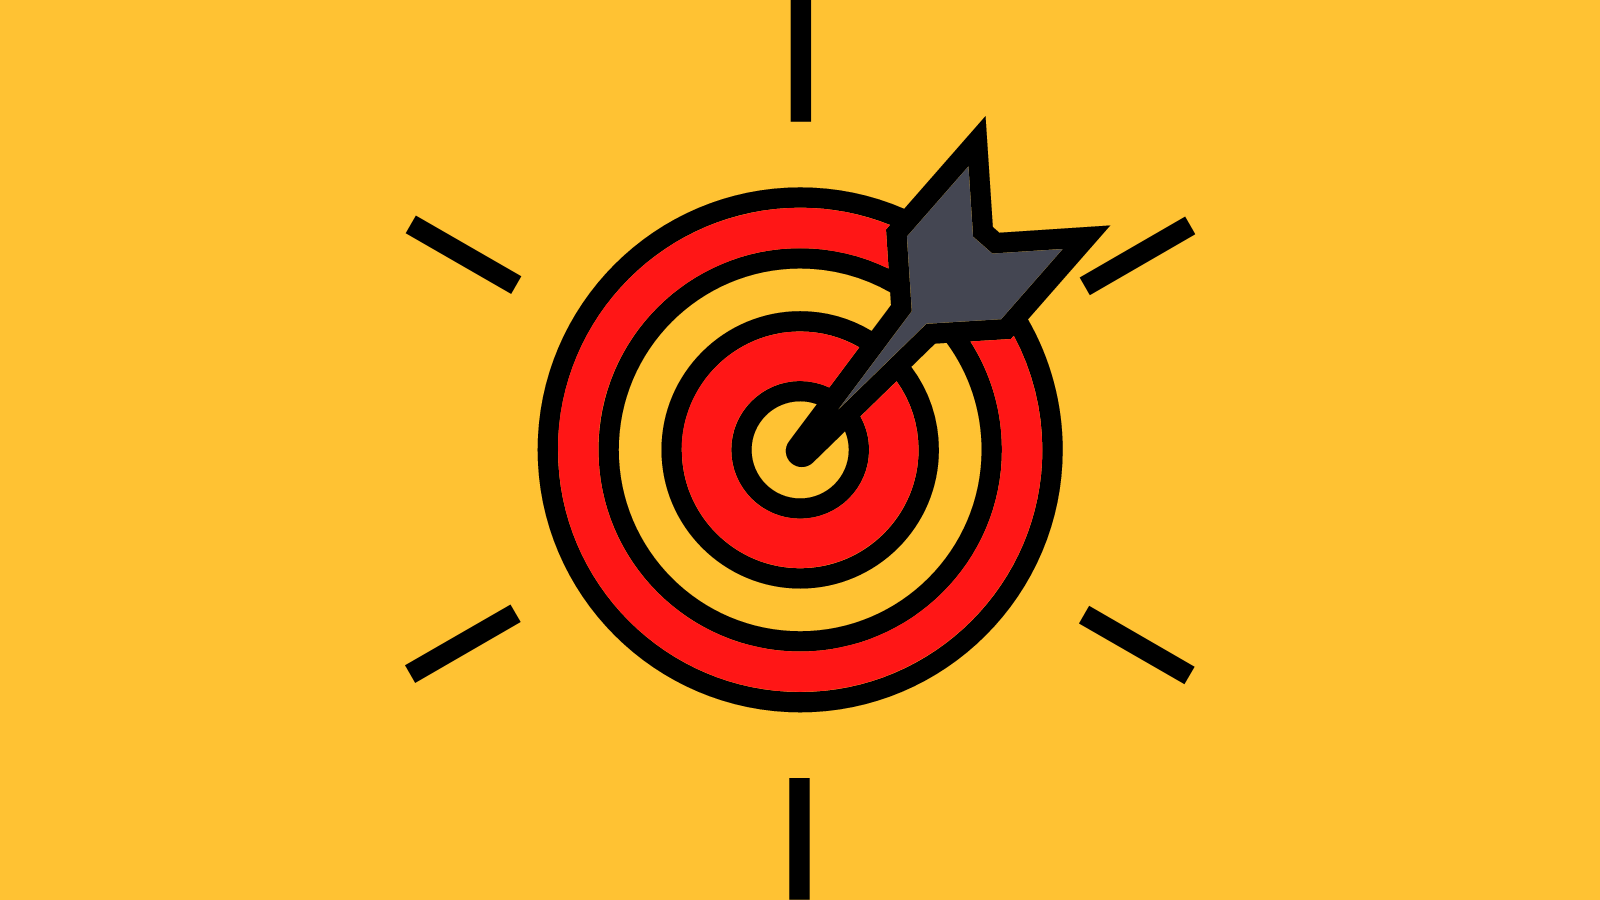 A target with an arrow hitting the center